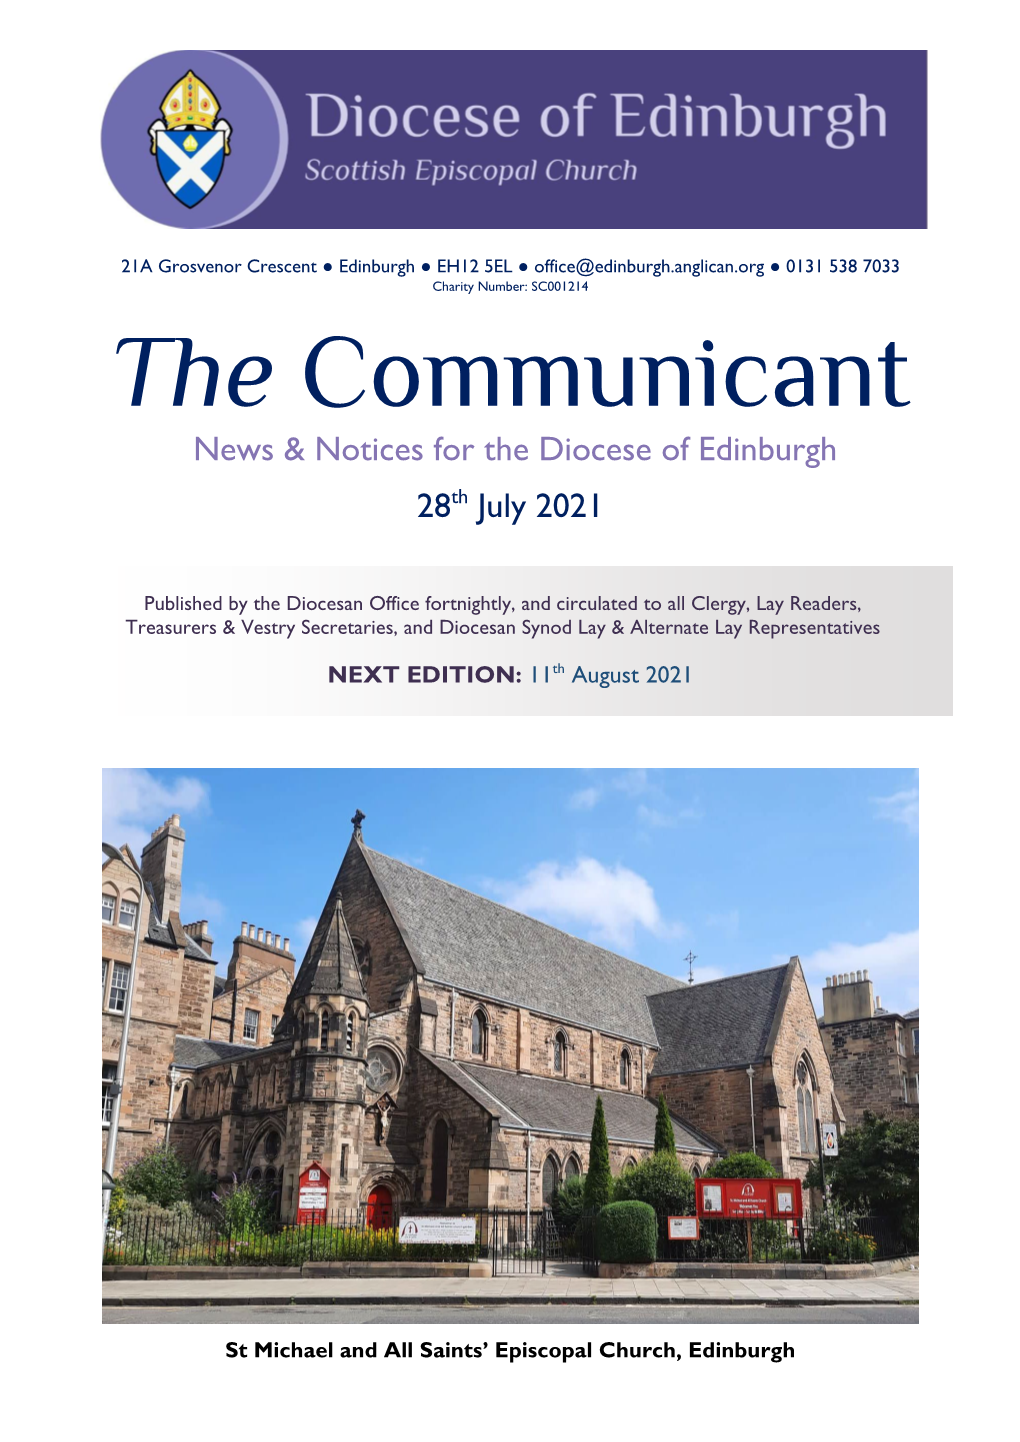 The Communicant 28 July 2021